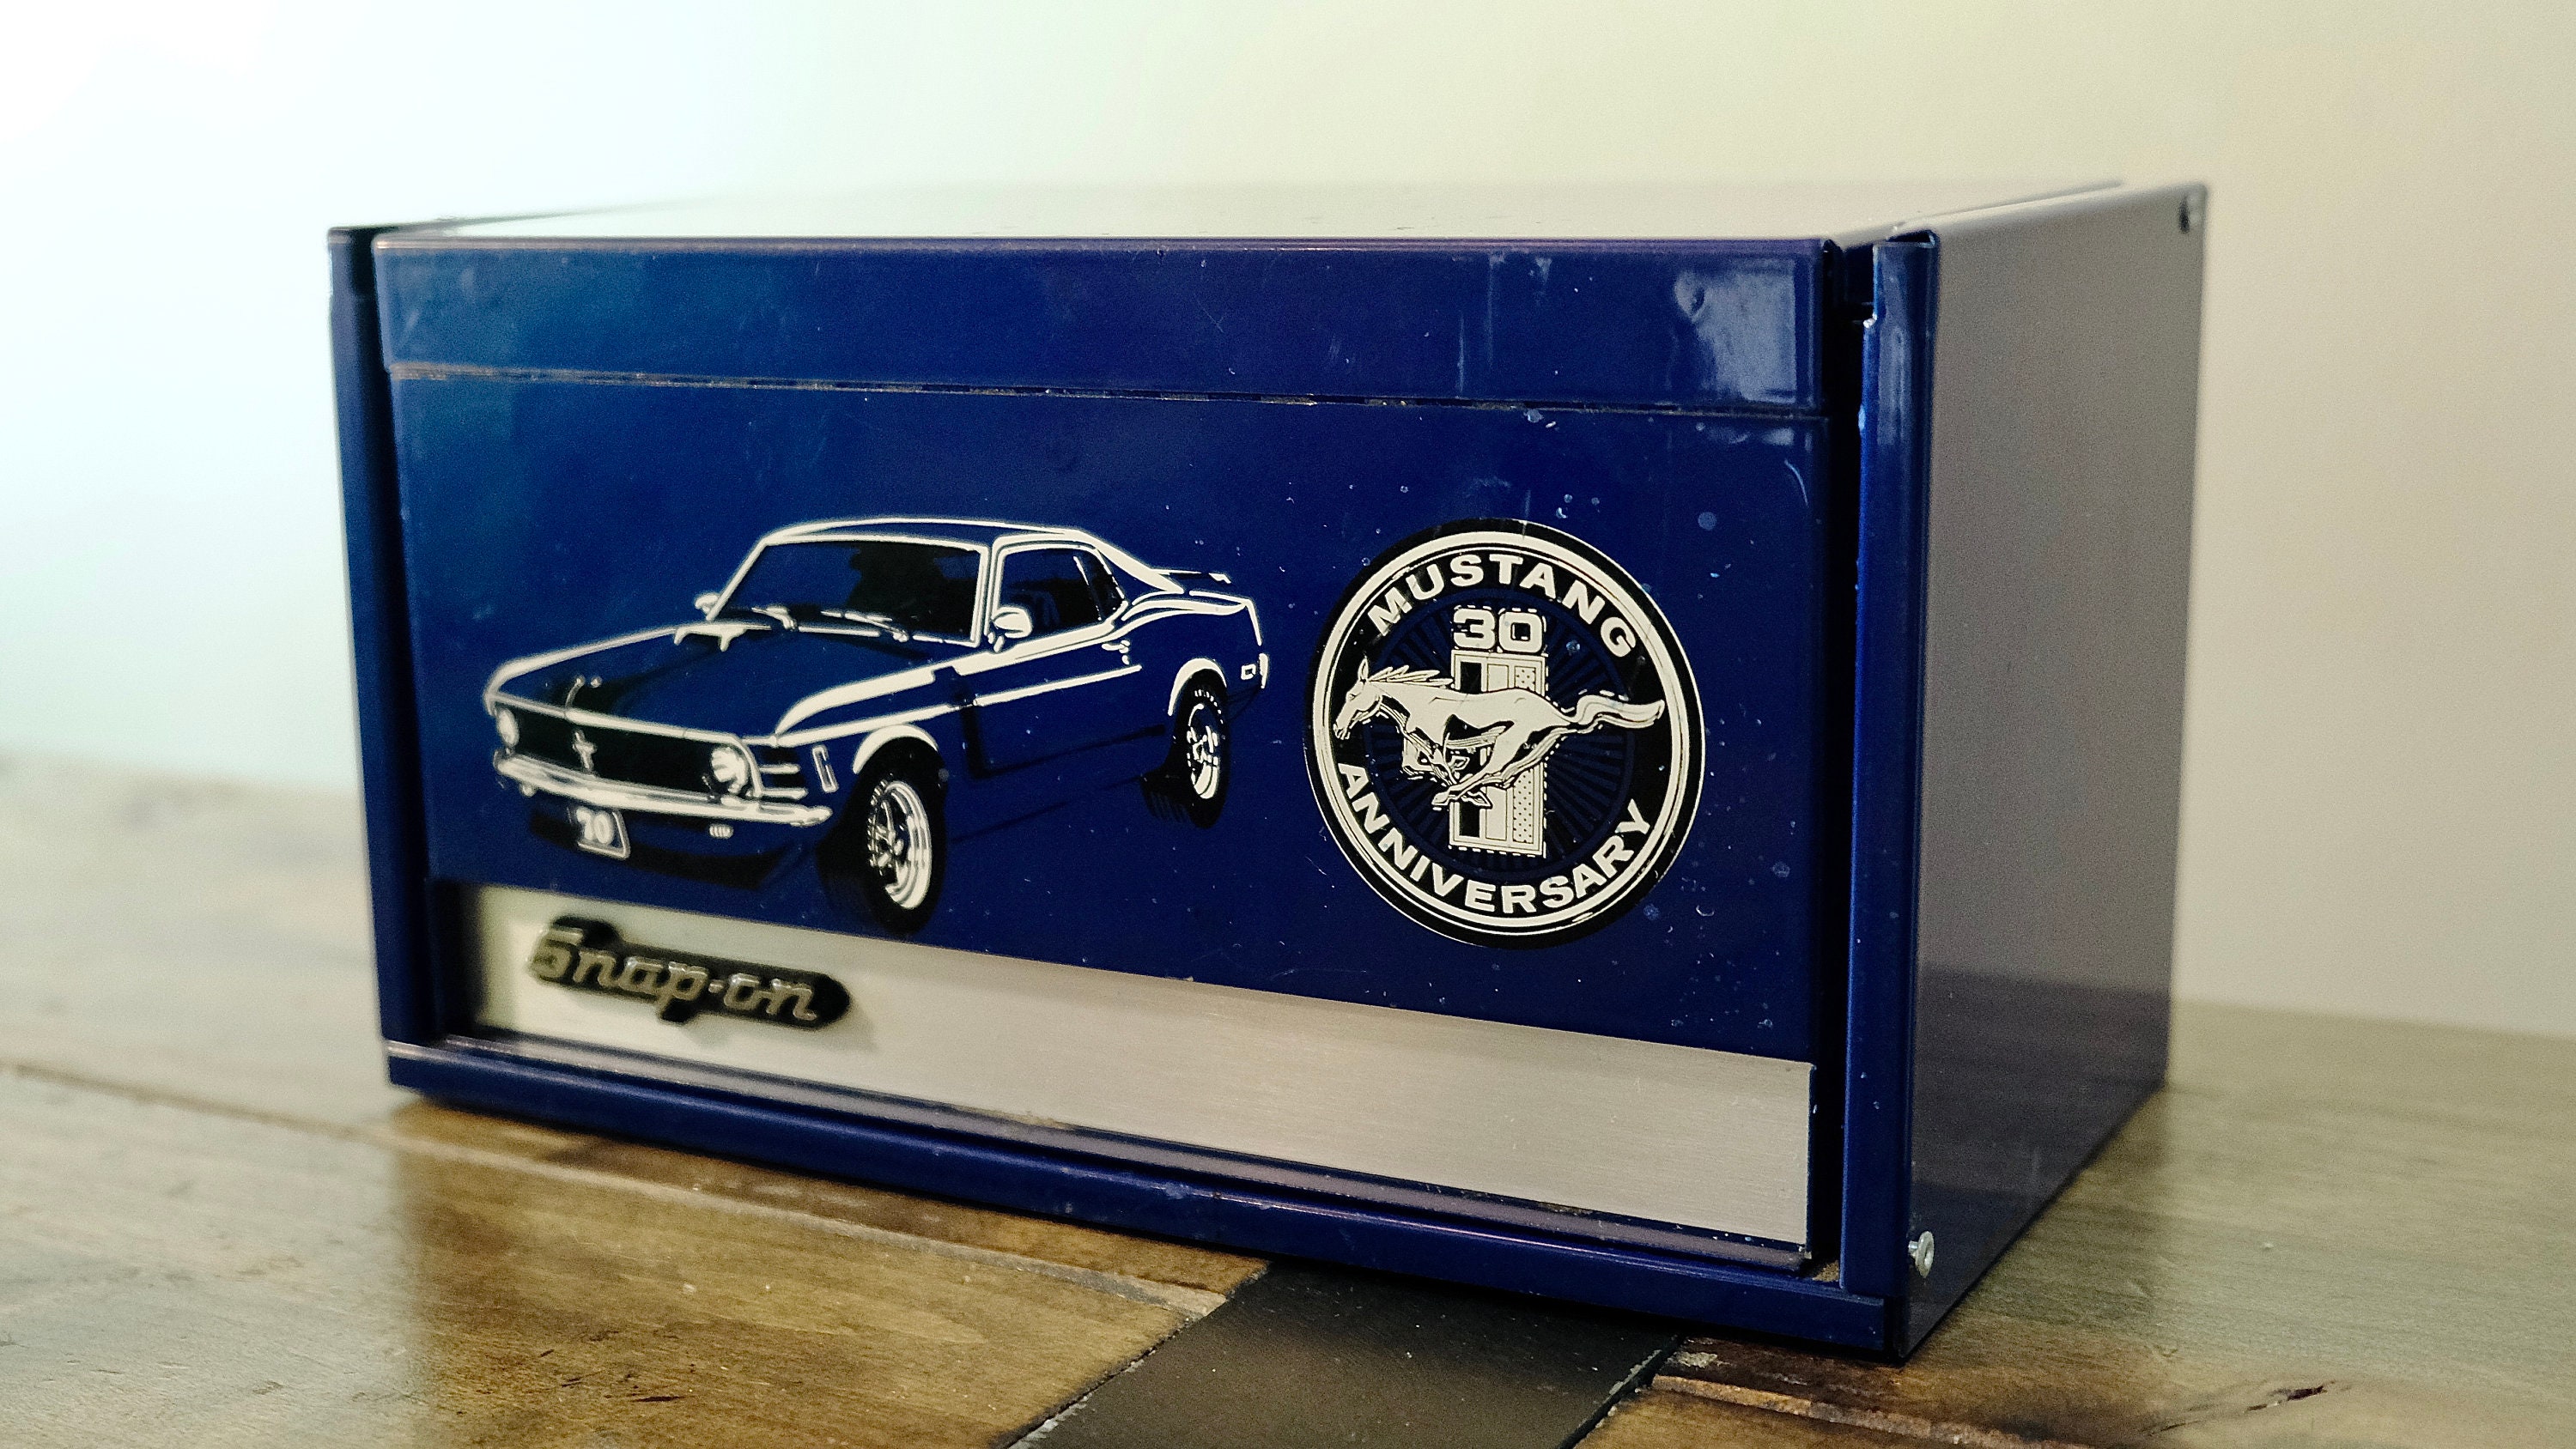 Rare Vintage 90s Mini Snap on Tool Box Ford Mustang 30th Anniversary 1995  Licensed Classic Cars Navy Blue Drawers Industrial Decor 